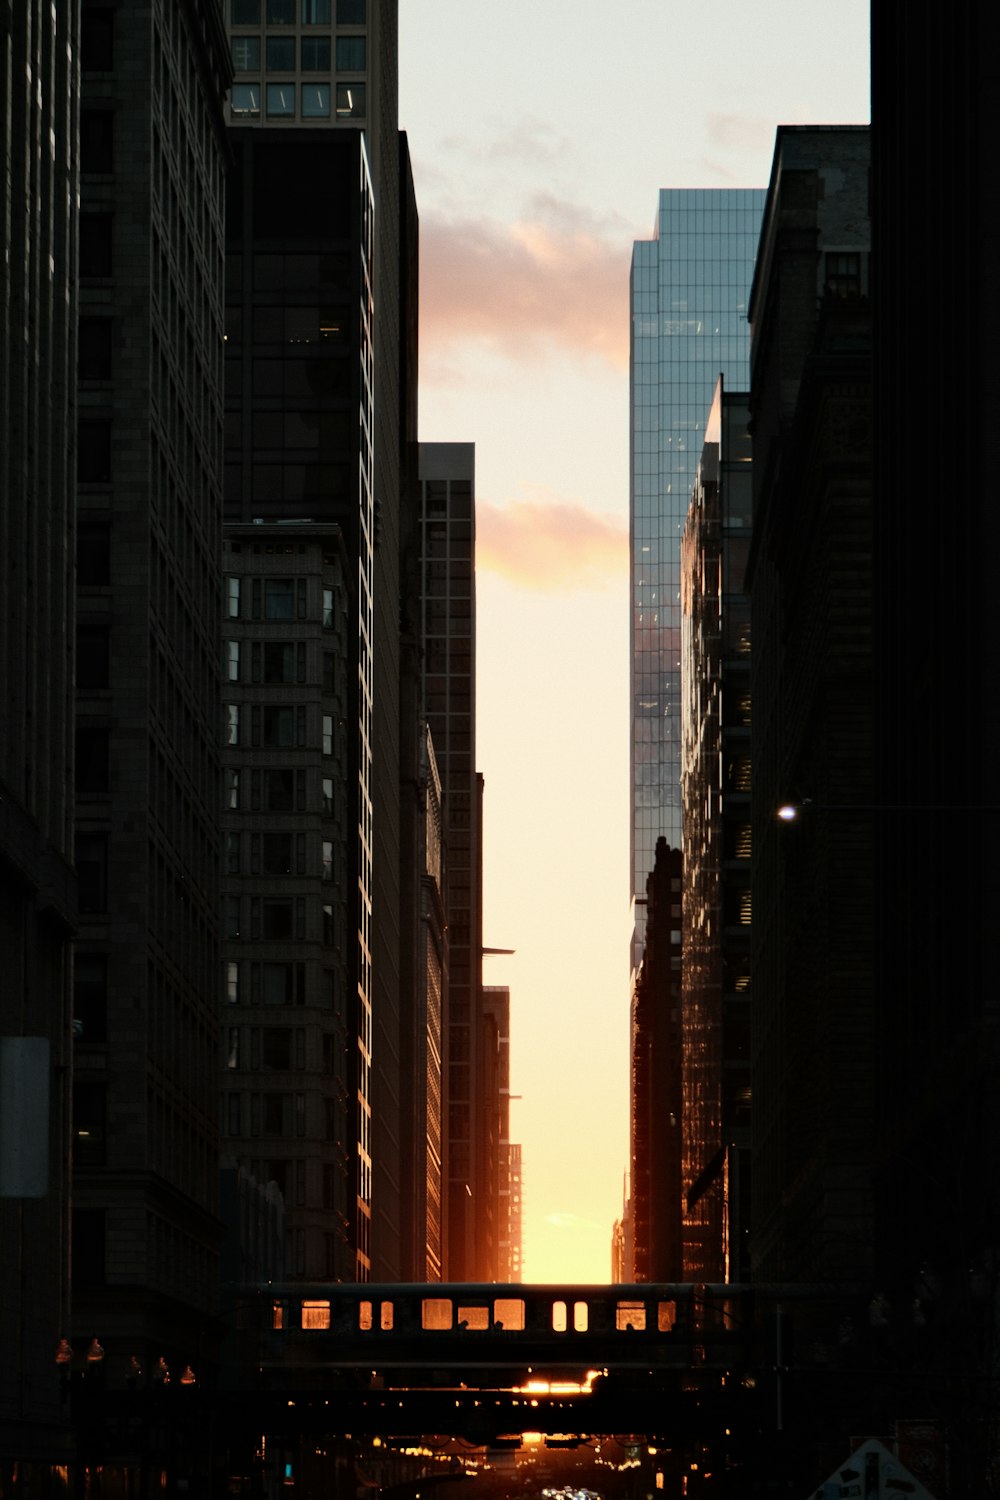 the sun is setting in a city with tall buildings